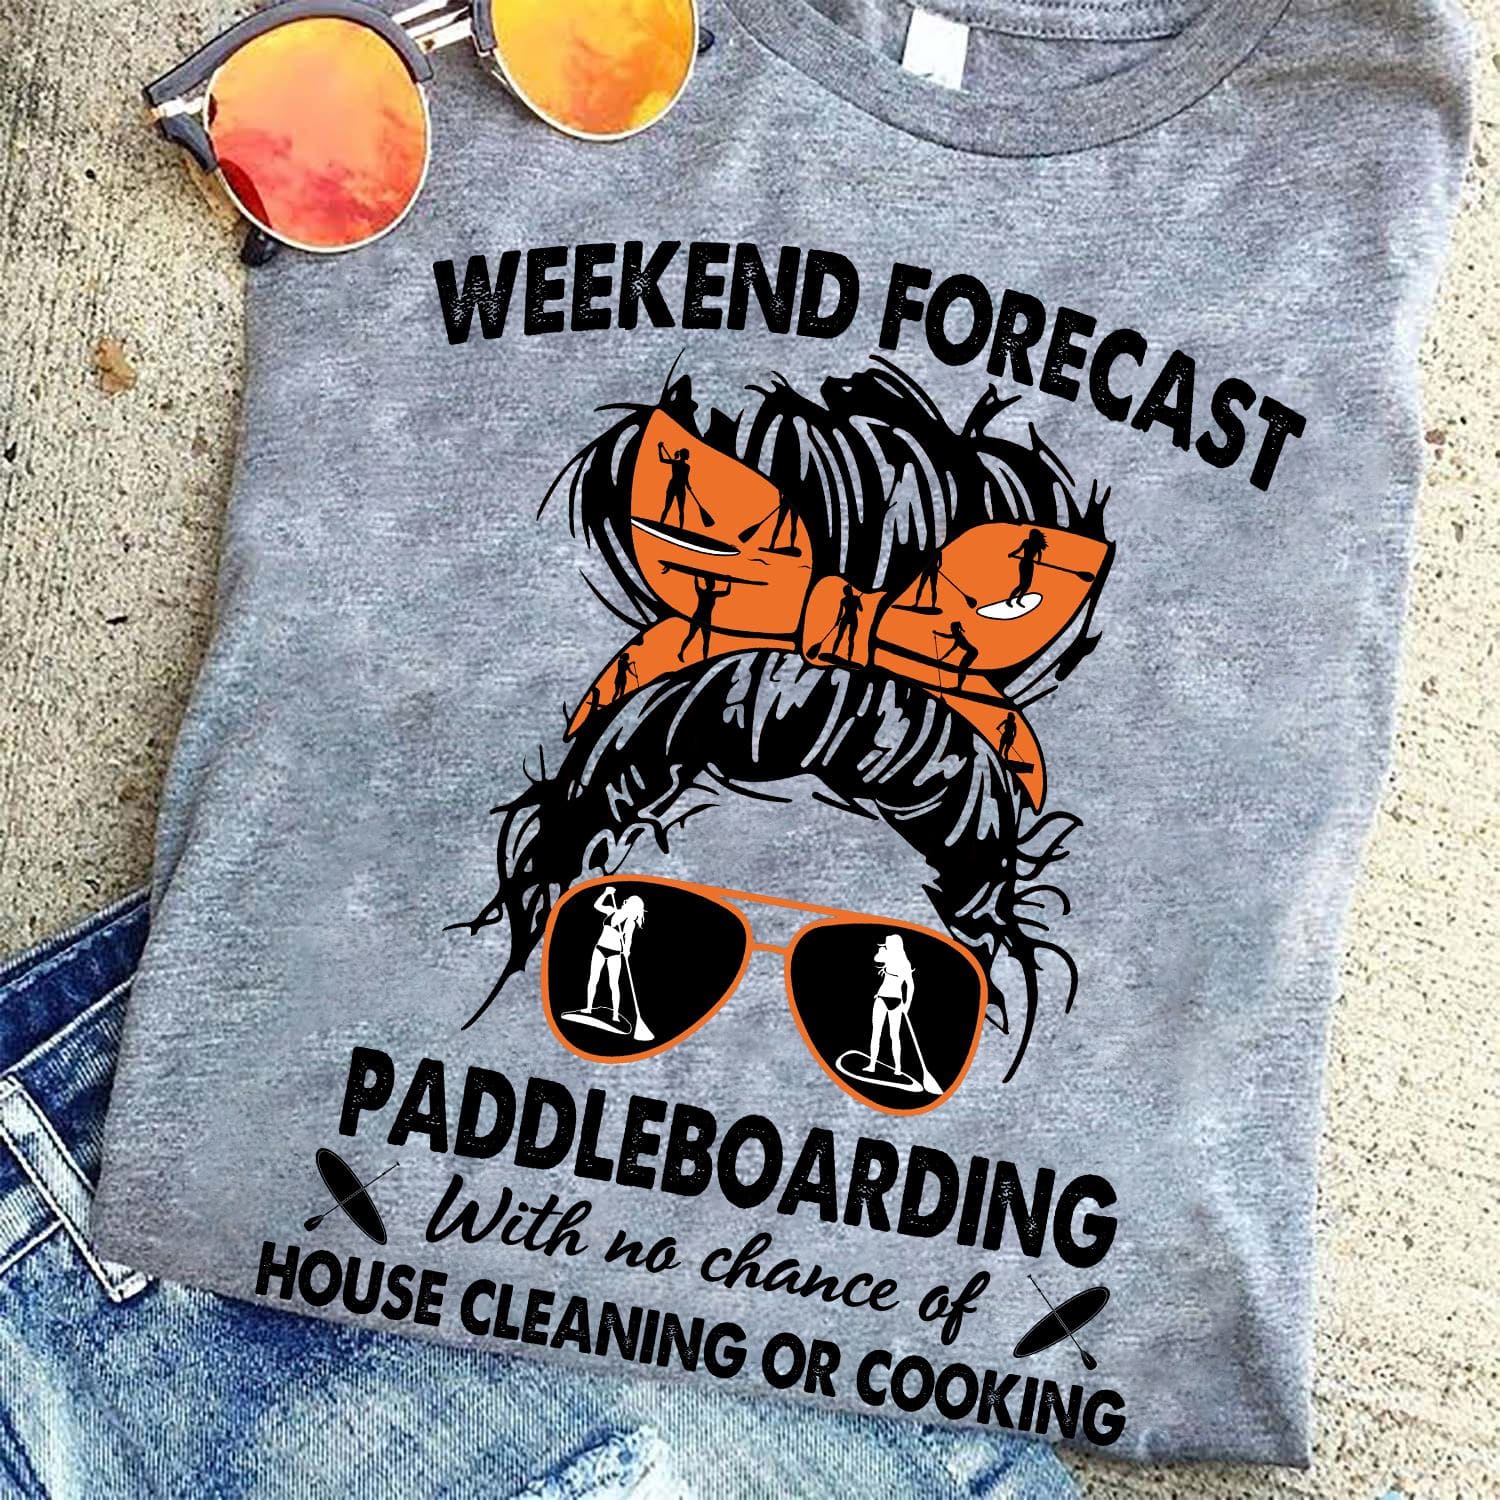 Weekend forecast paddleboarding with no chance of house cleaning or cooking - Girl loves paddleboarding